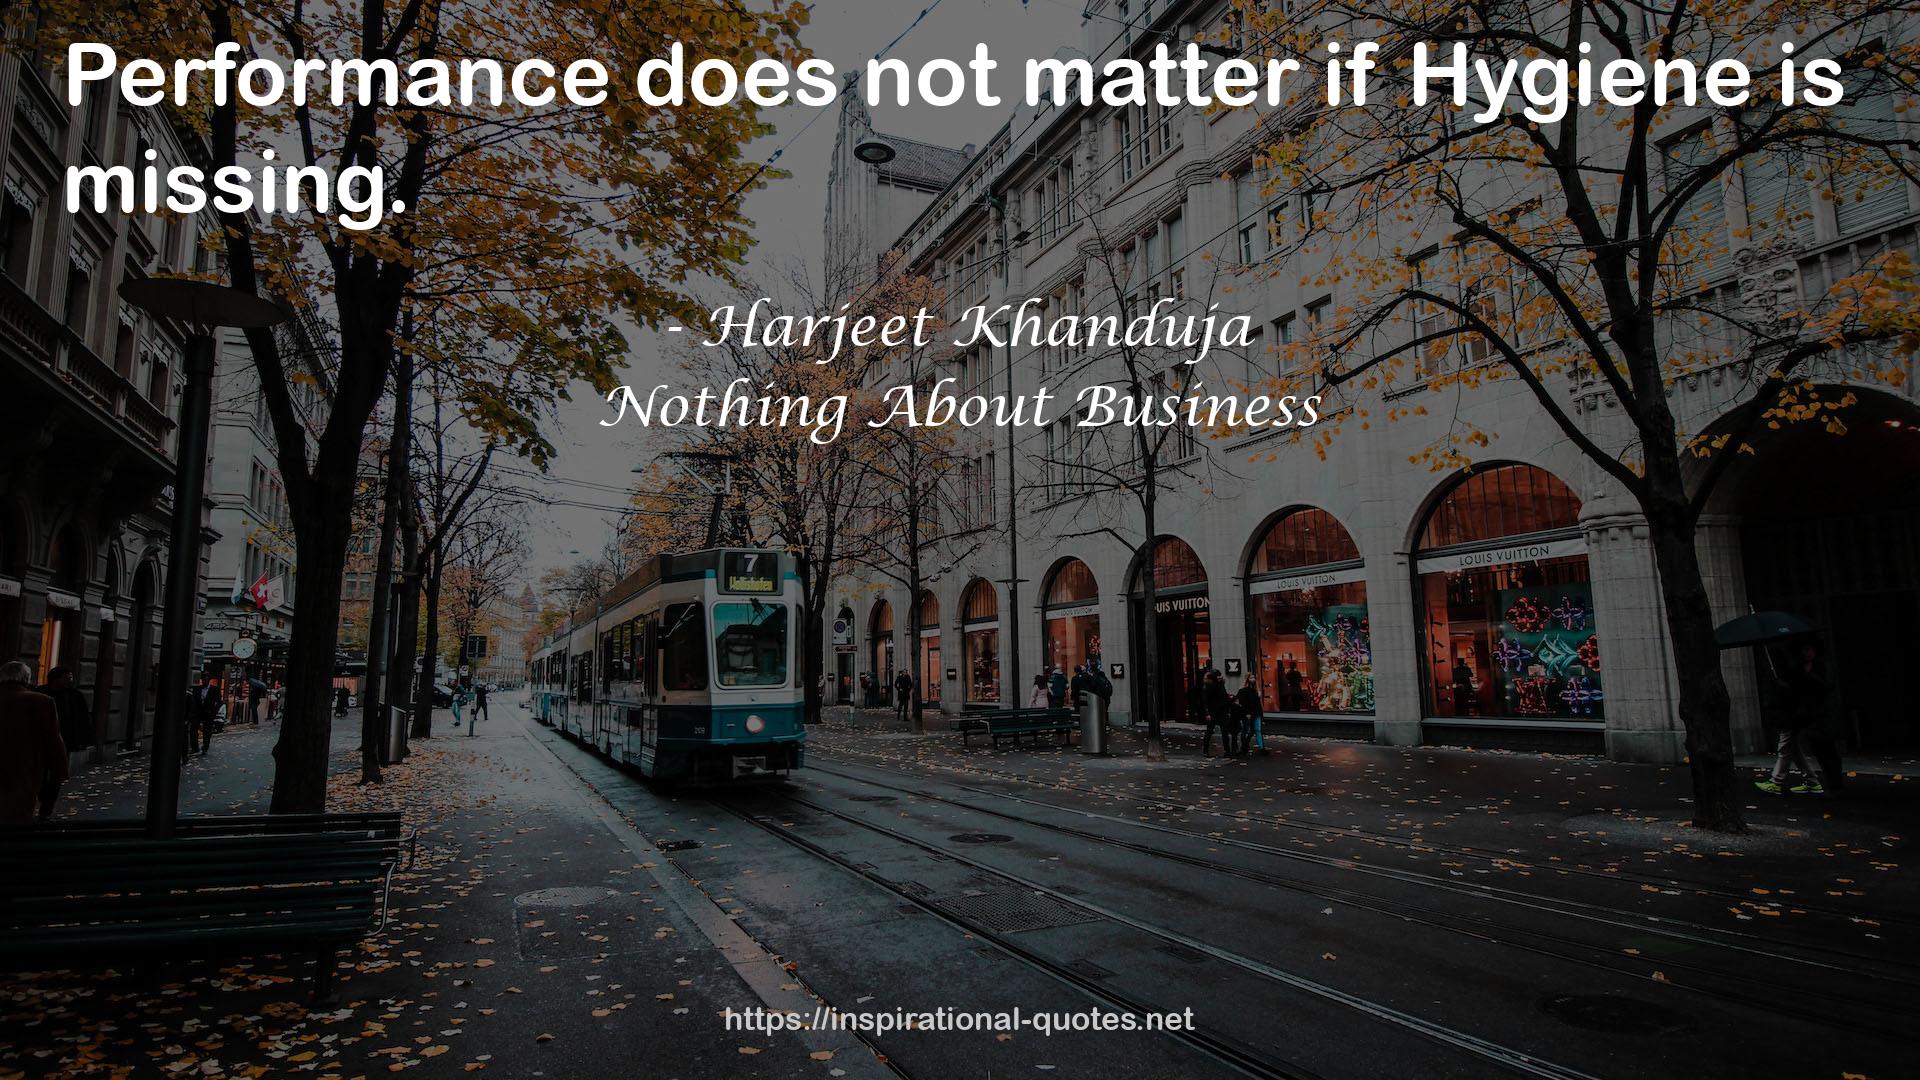 Nothing About Business QUOTES